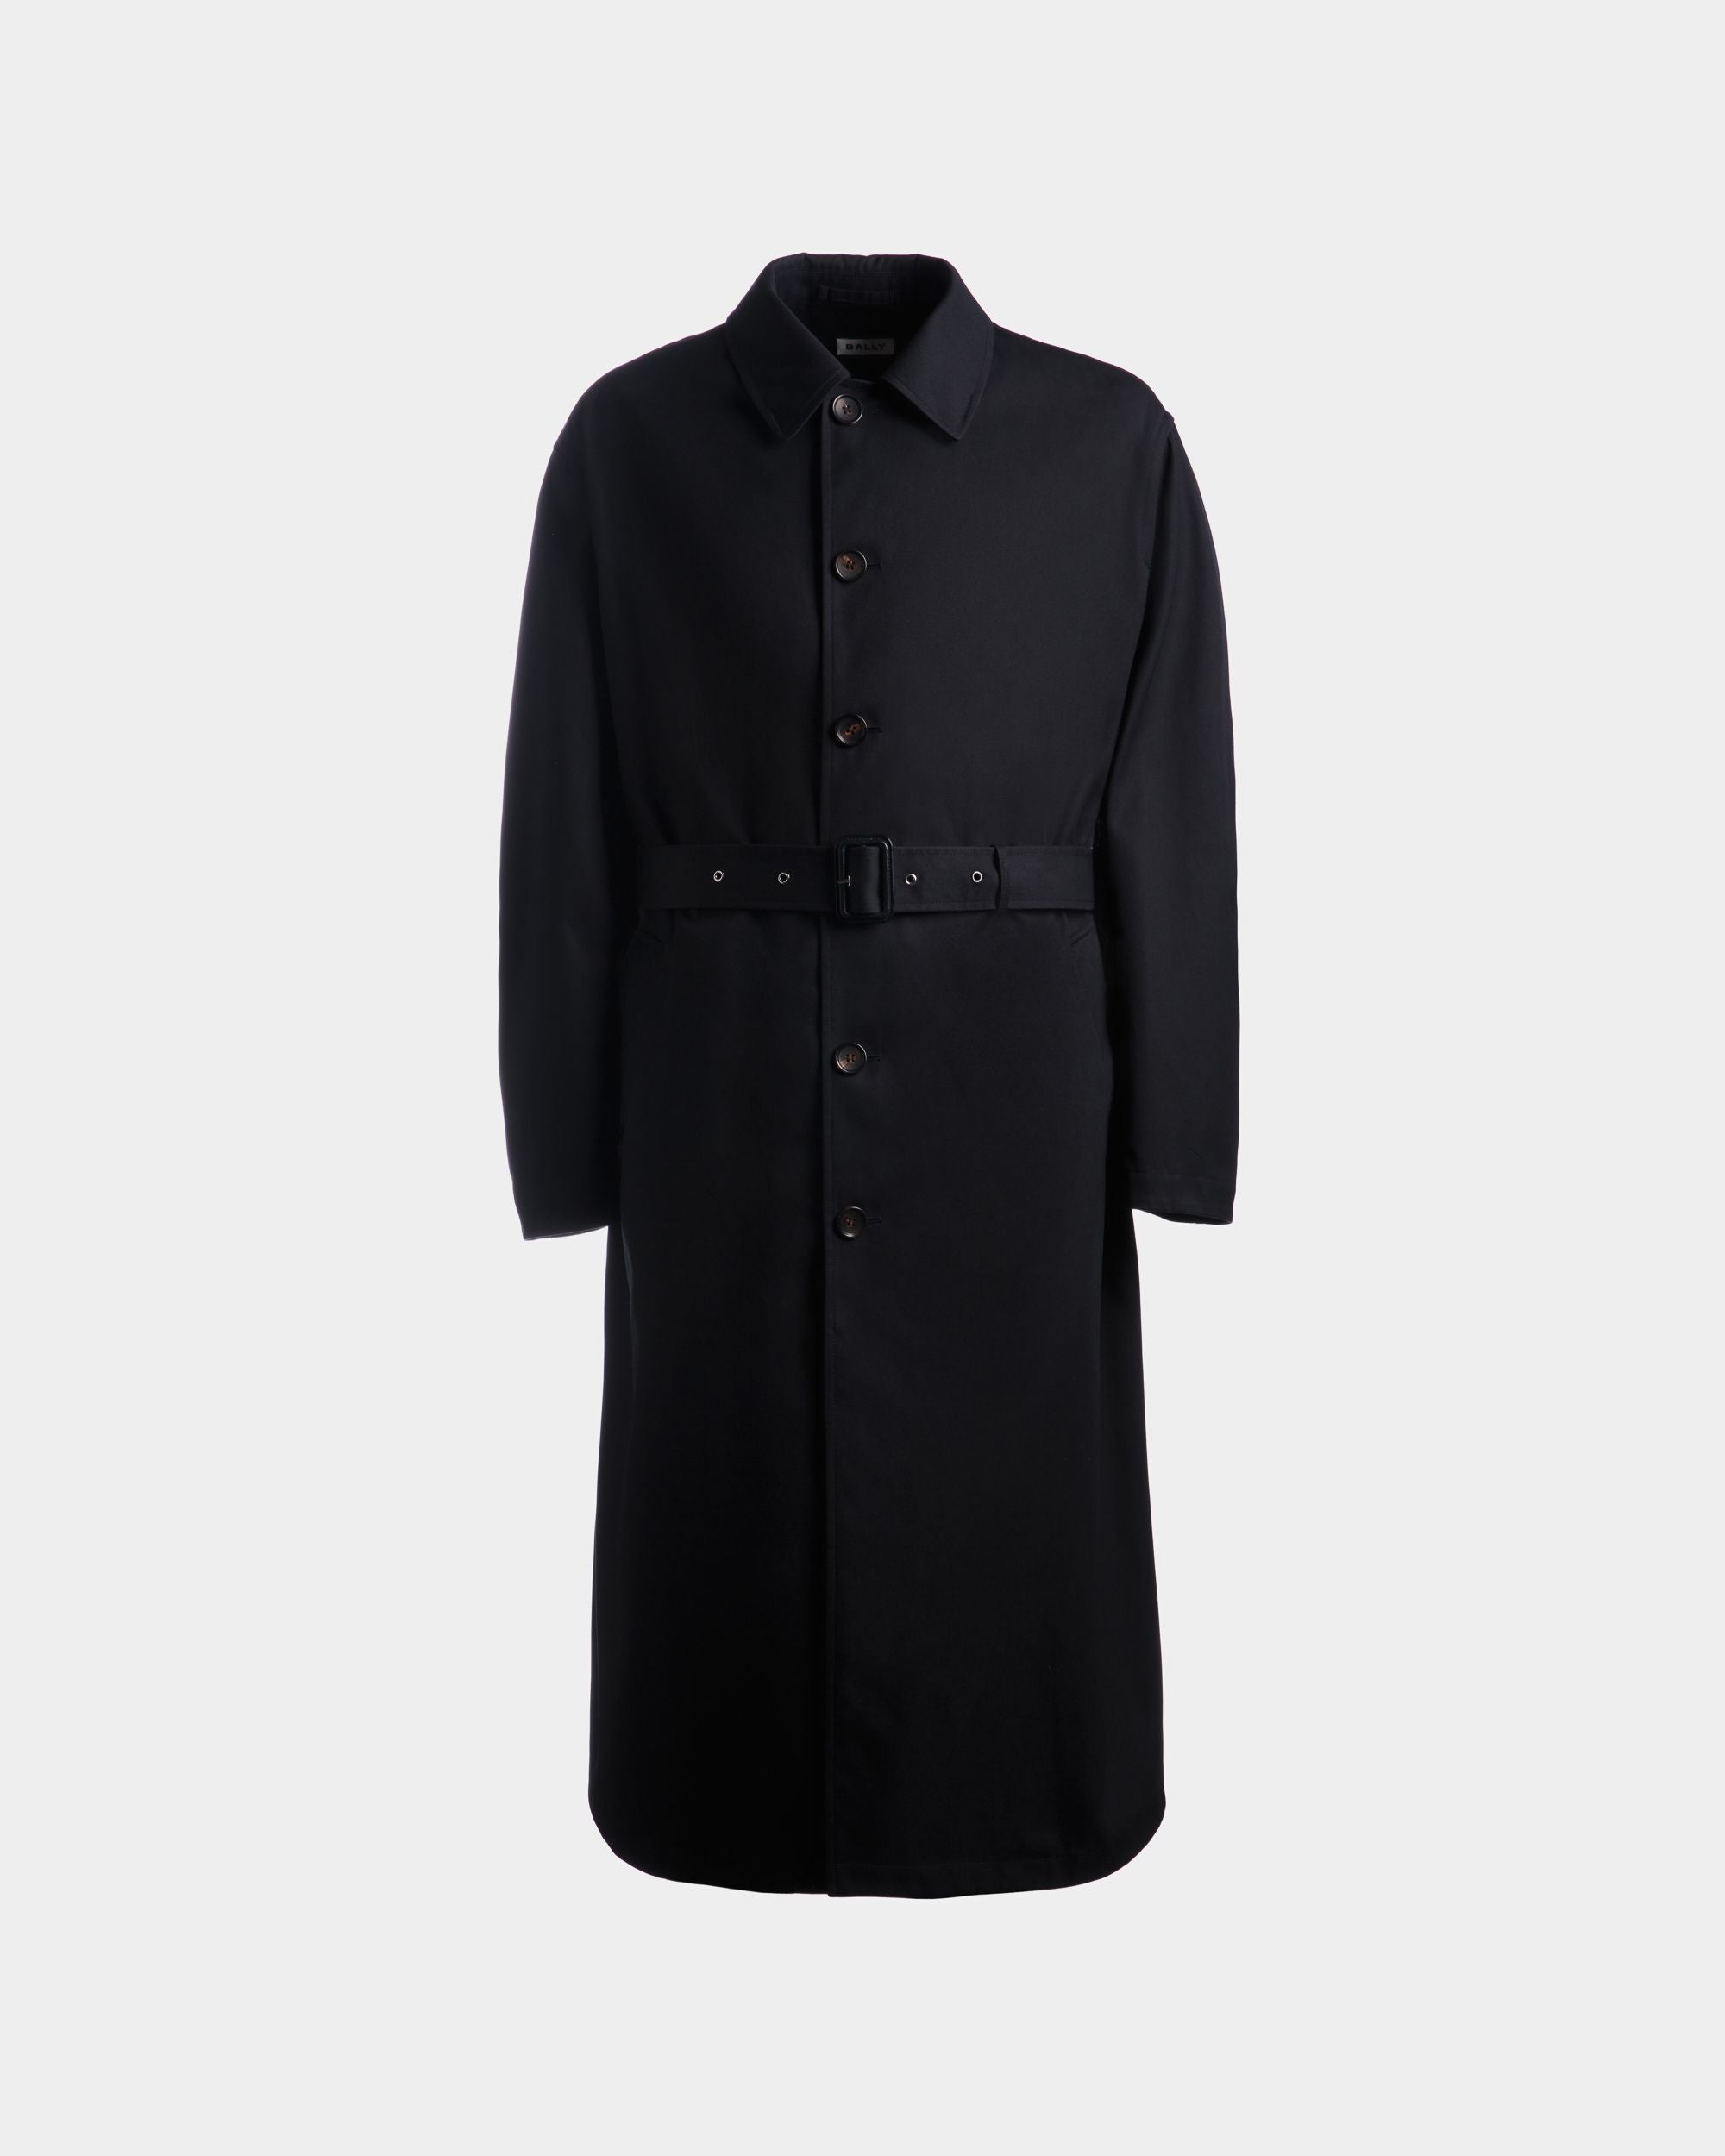 Men's Trench Coat in Navy Blue Mix Cotton | Bally | Still Life Front